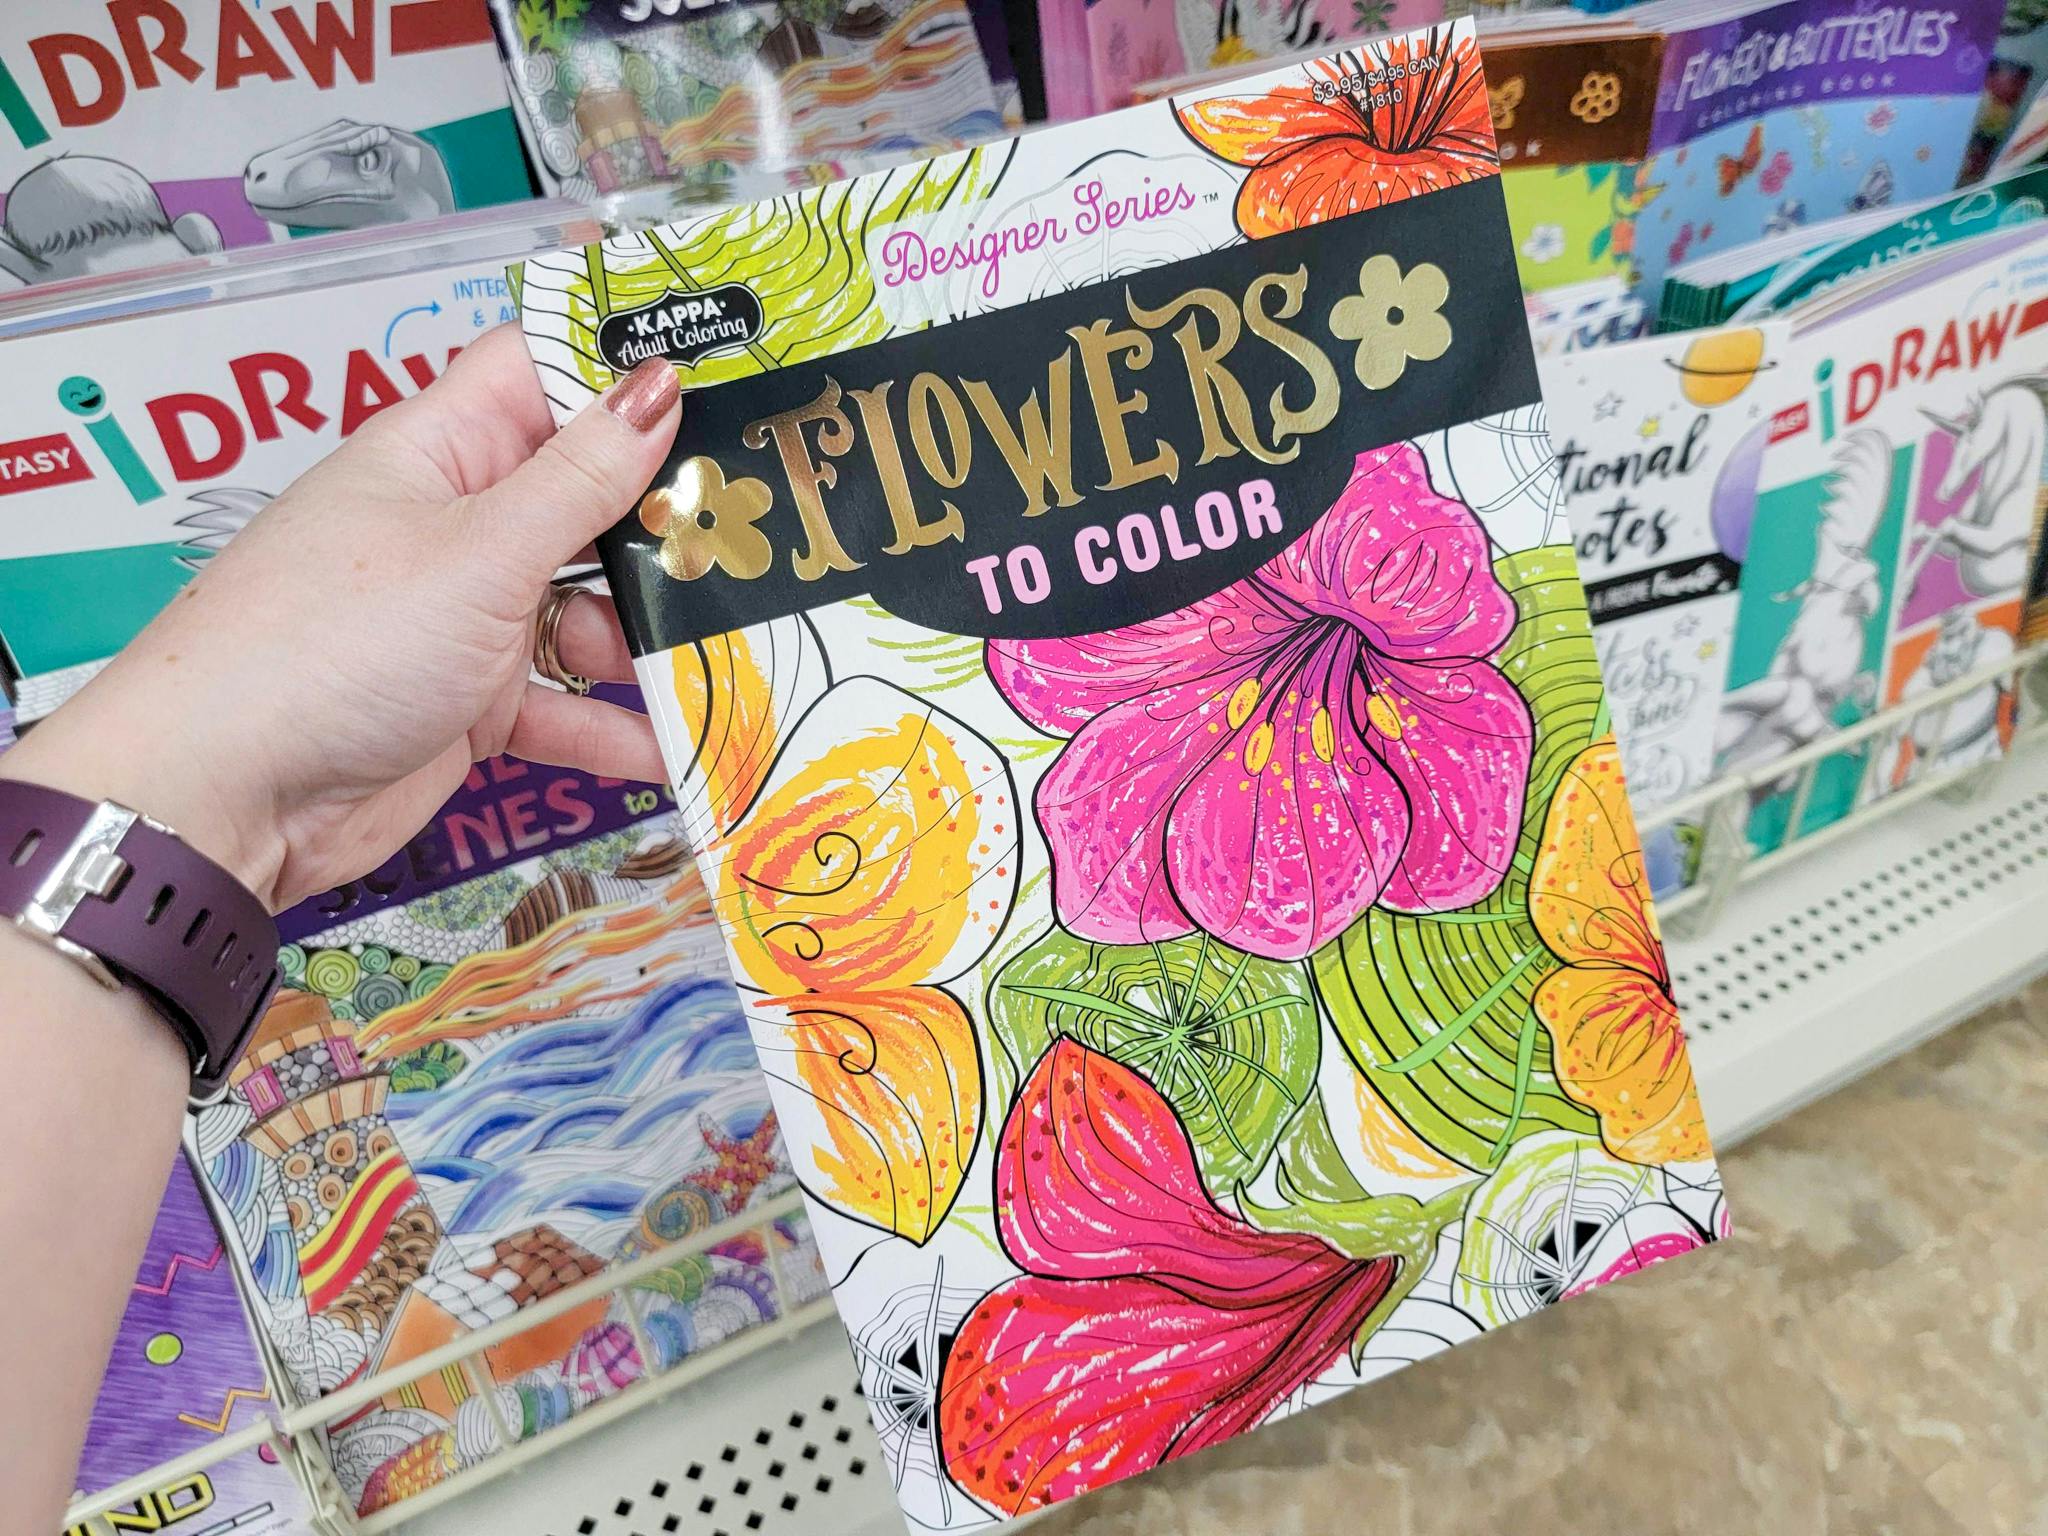 Adult Coloring Books at Dollar Tree - The Krazy Coupon Lady